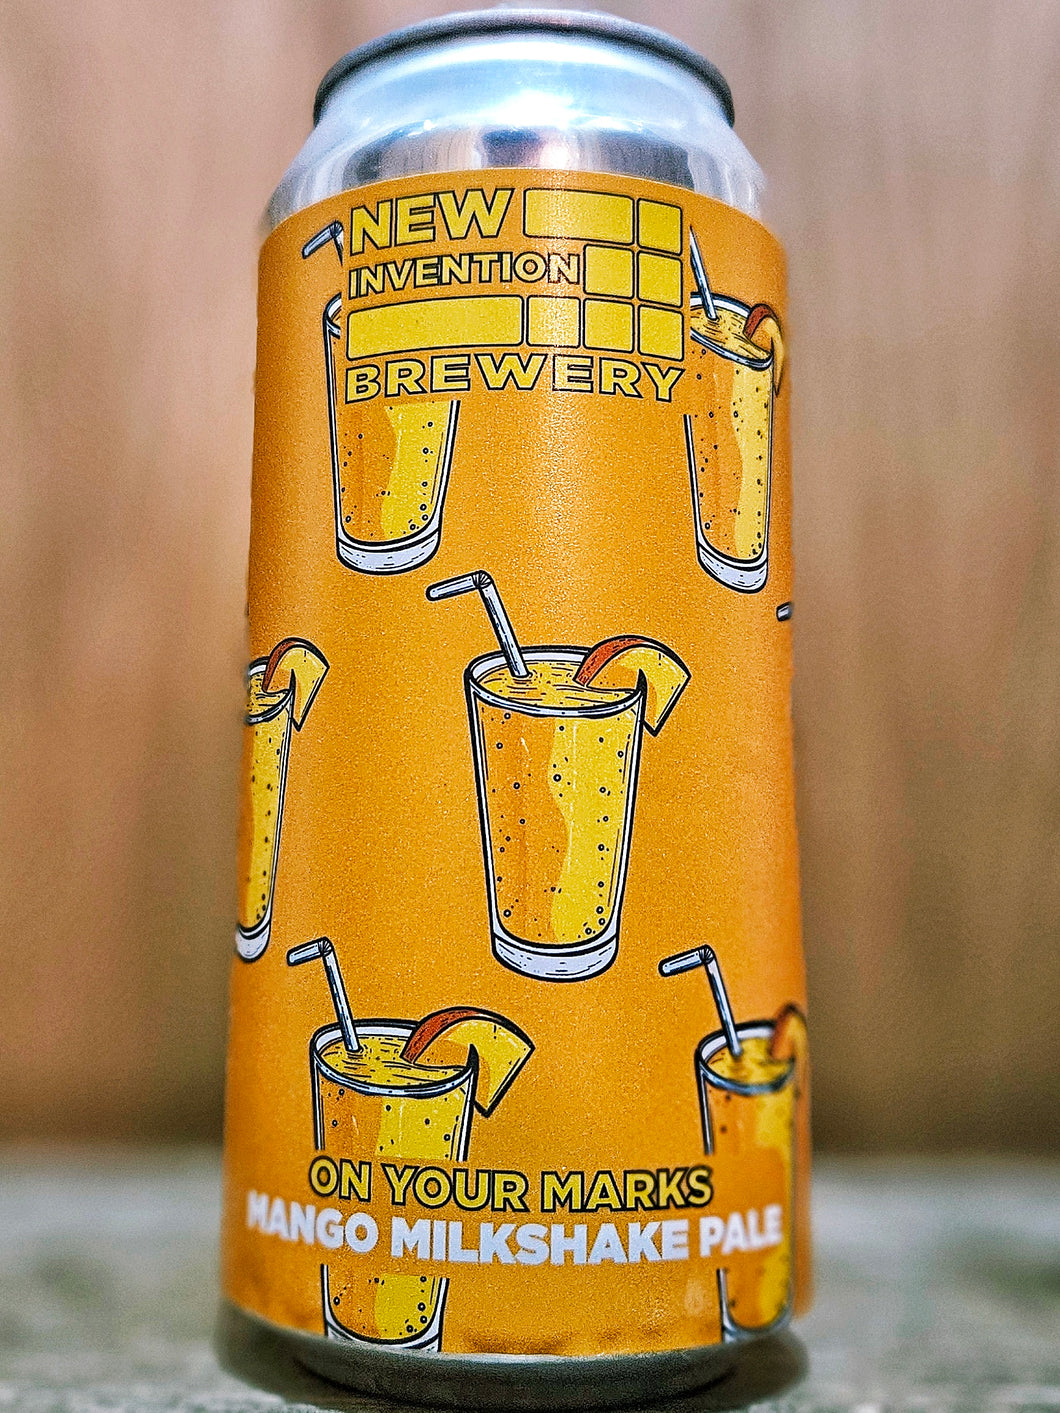 New Invention Brewery - On Your Marks